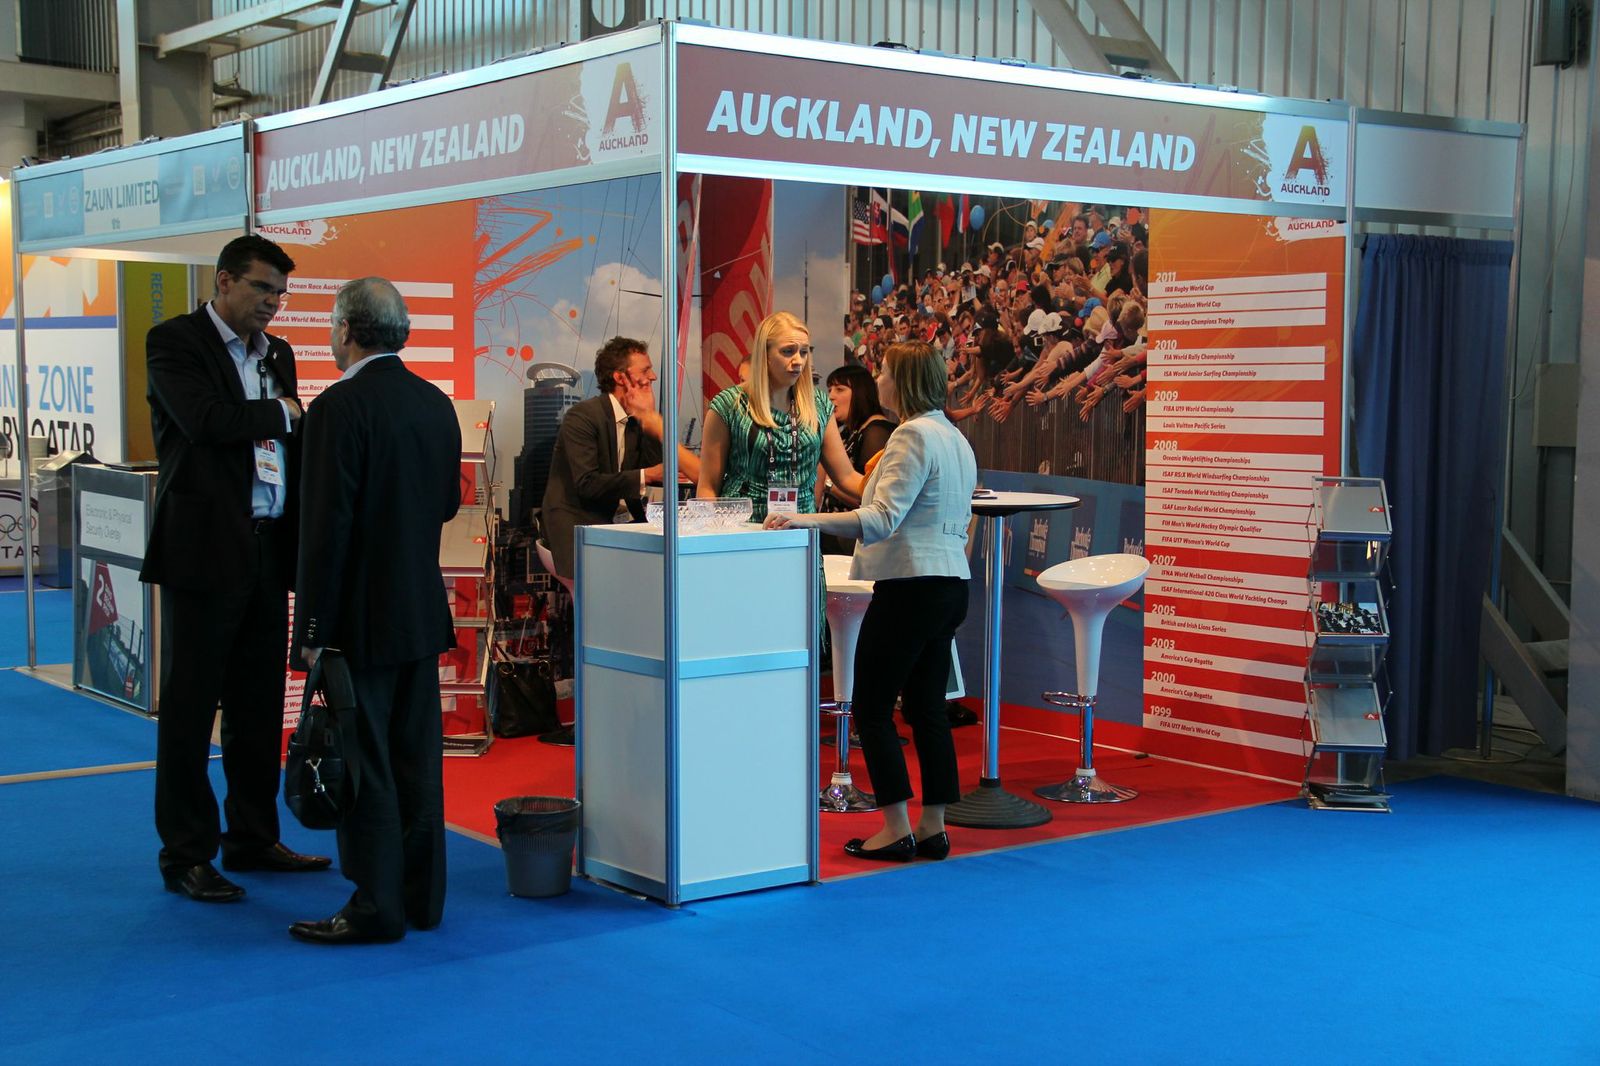 The Auckland, New Zealand Exhibition stand, SportAccord International Convention 2013 in Saint Petersburg, Russia